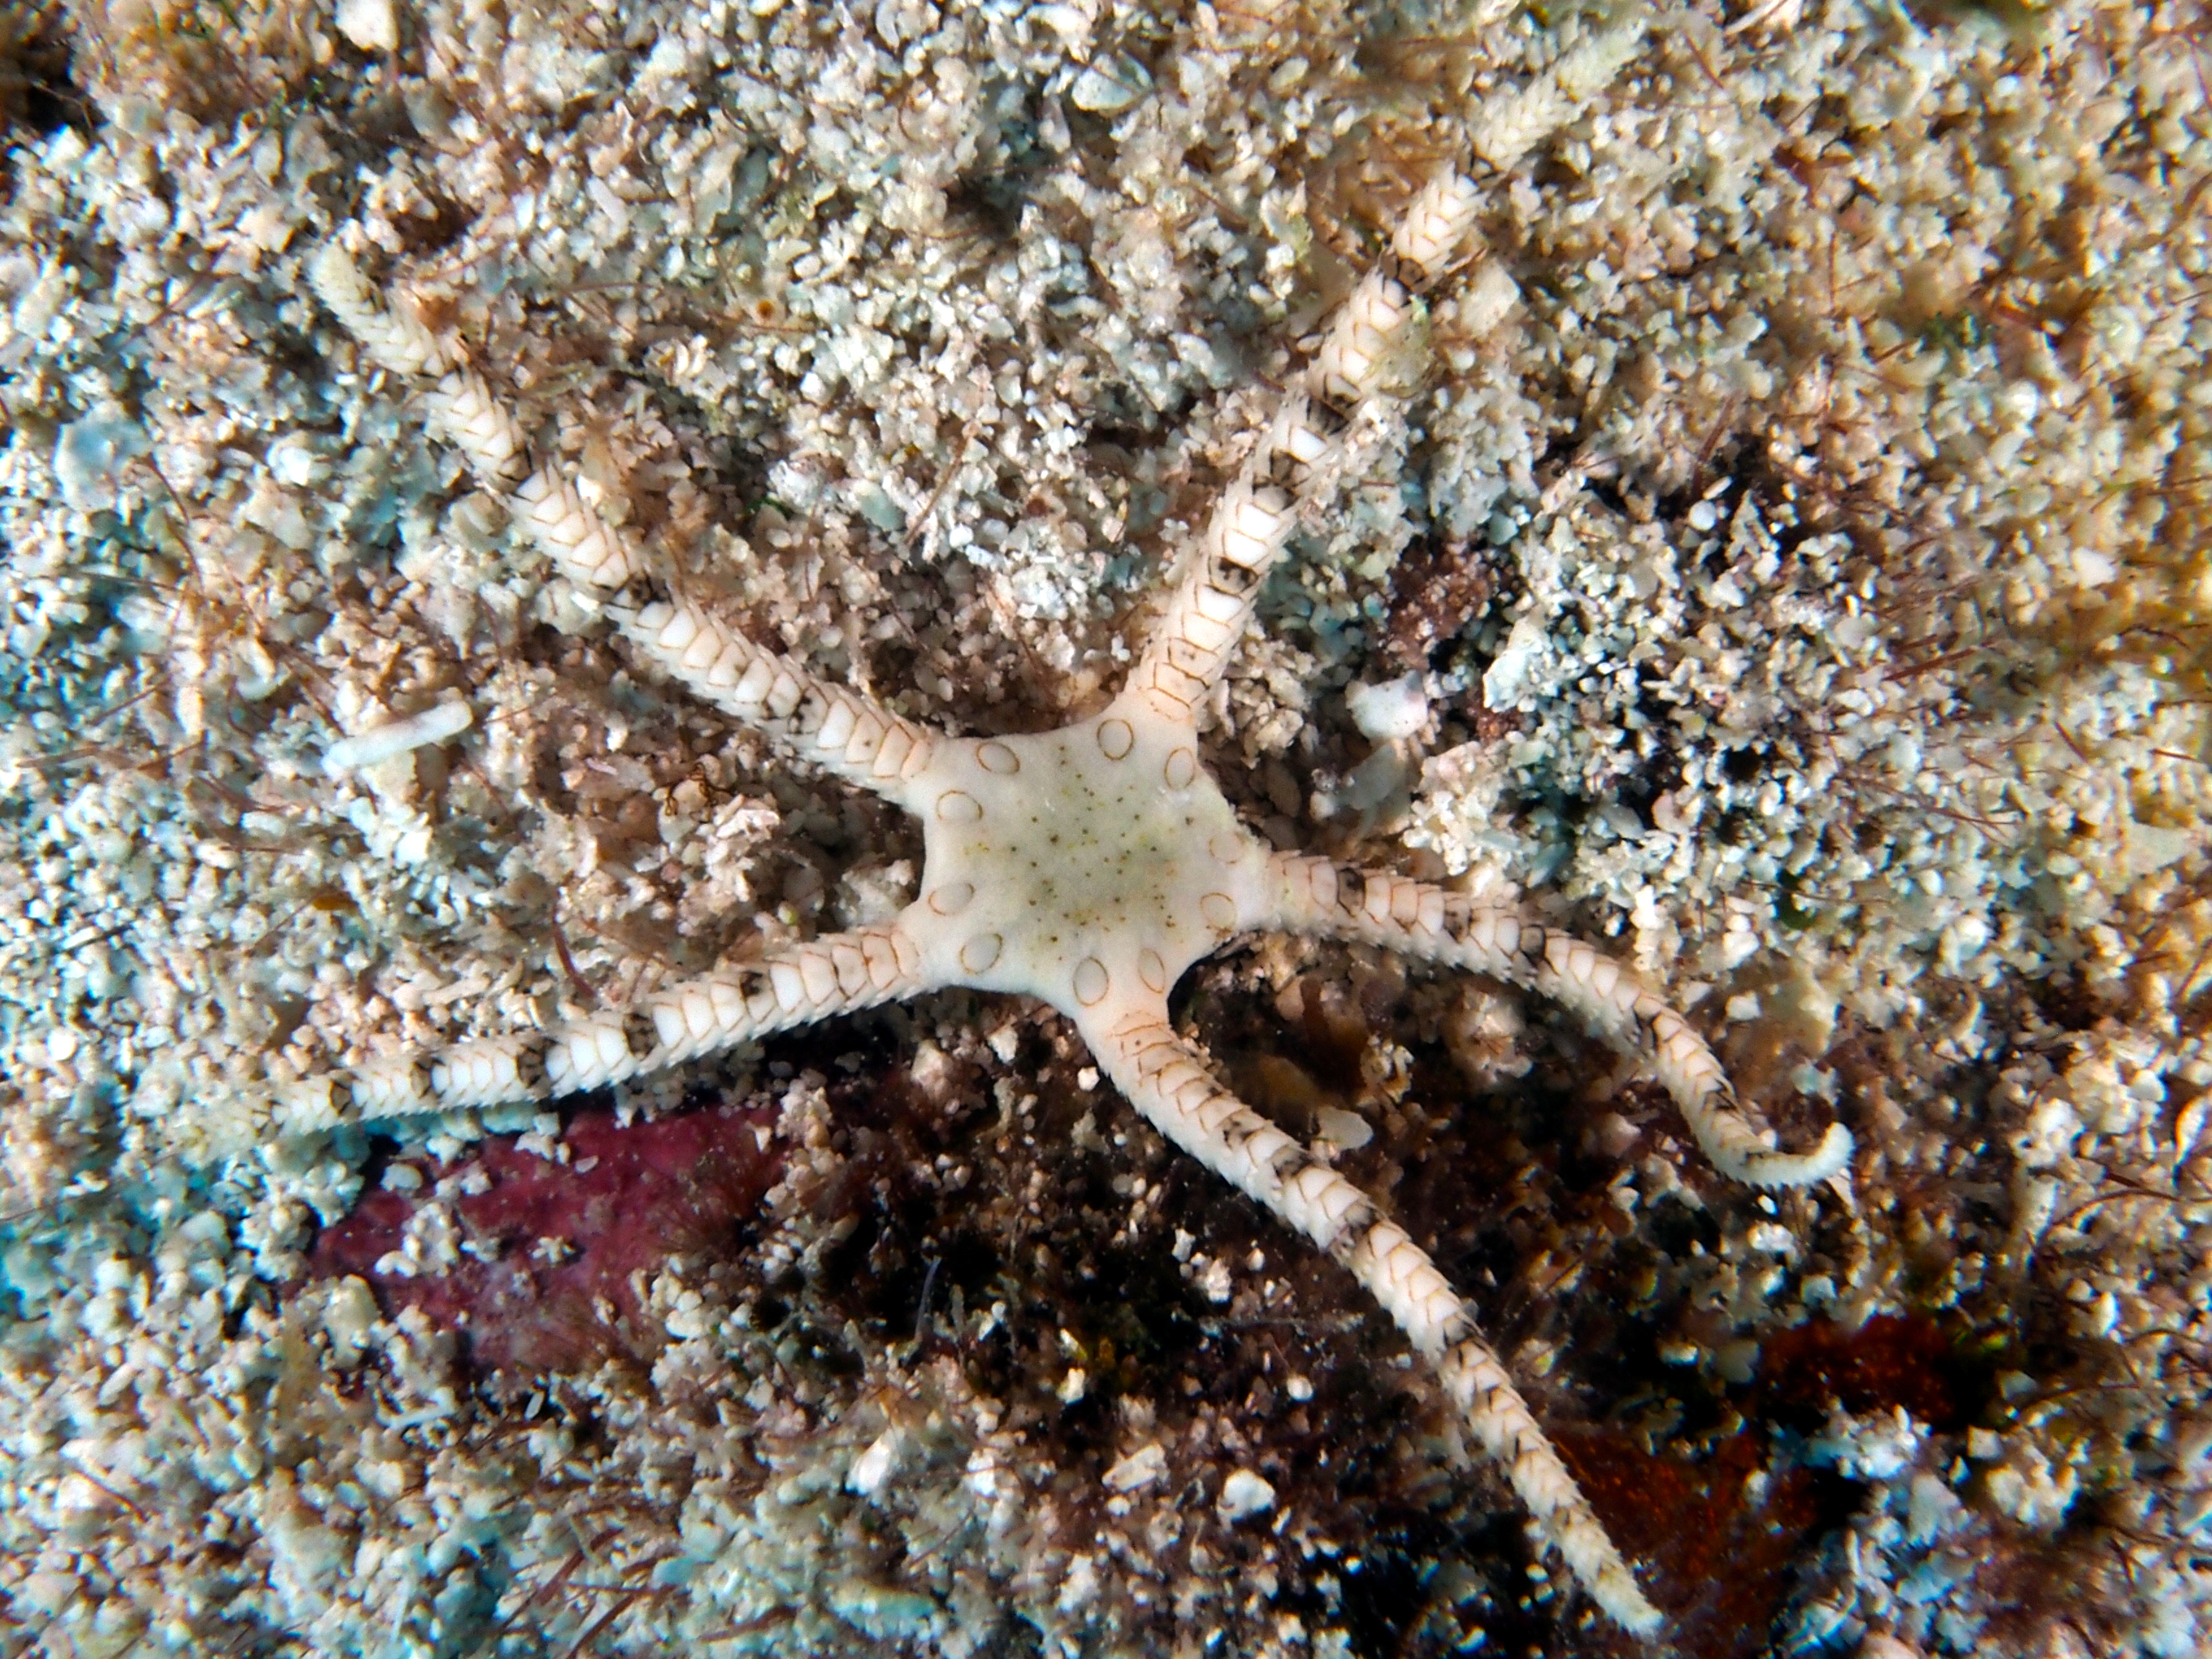 Circle-Marked Brittle Star - Ophioderma cinerea - Cozumel, Mexico